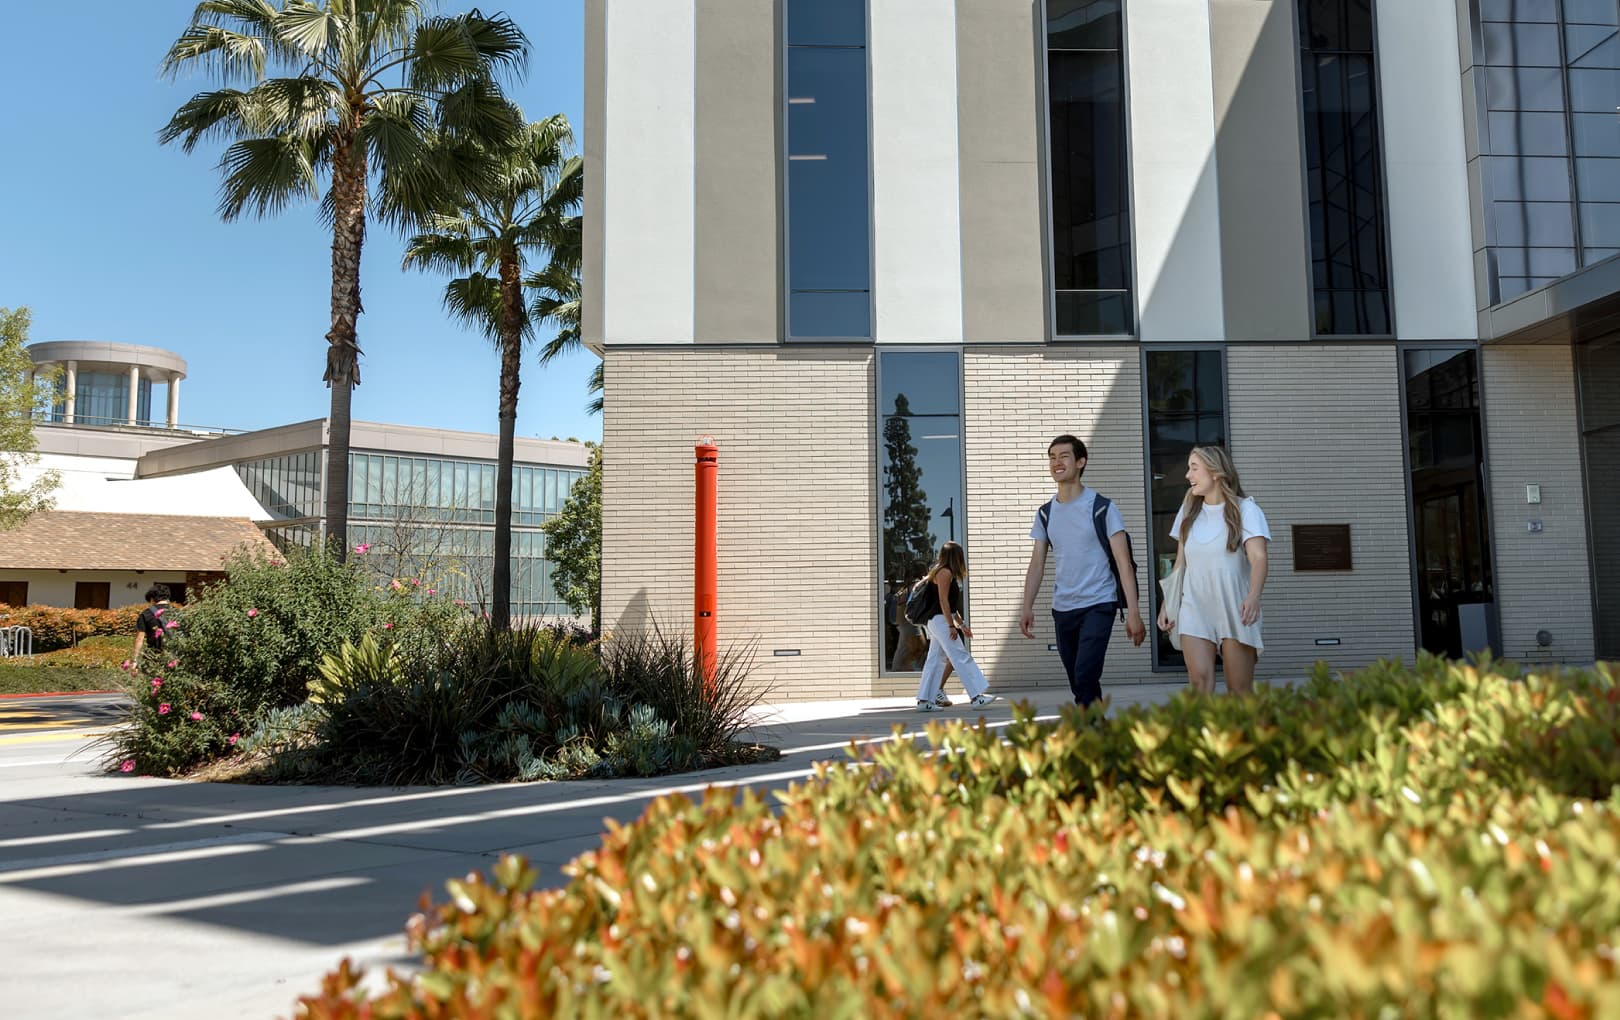 Students exiting a large modern building with palm trees in the background